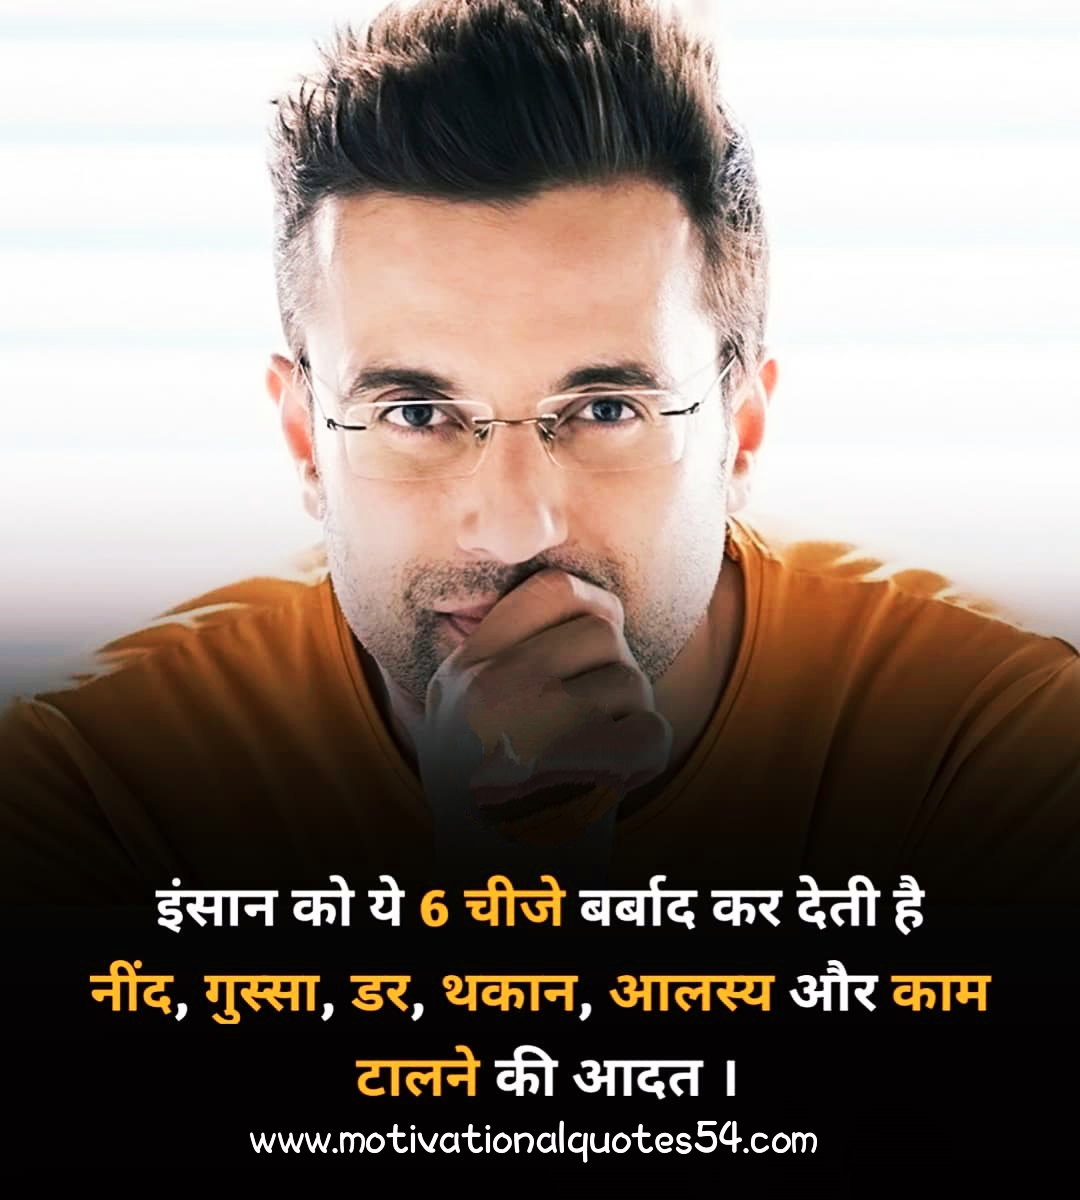 Hindi Quotes About Life And Love